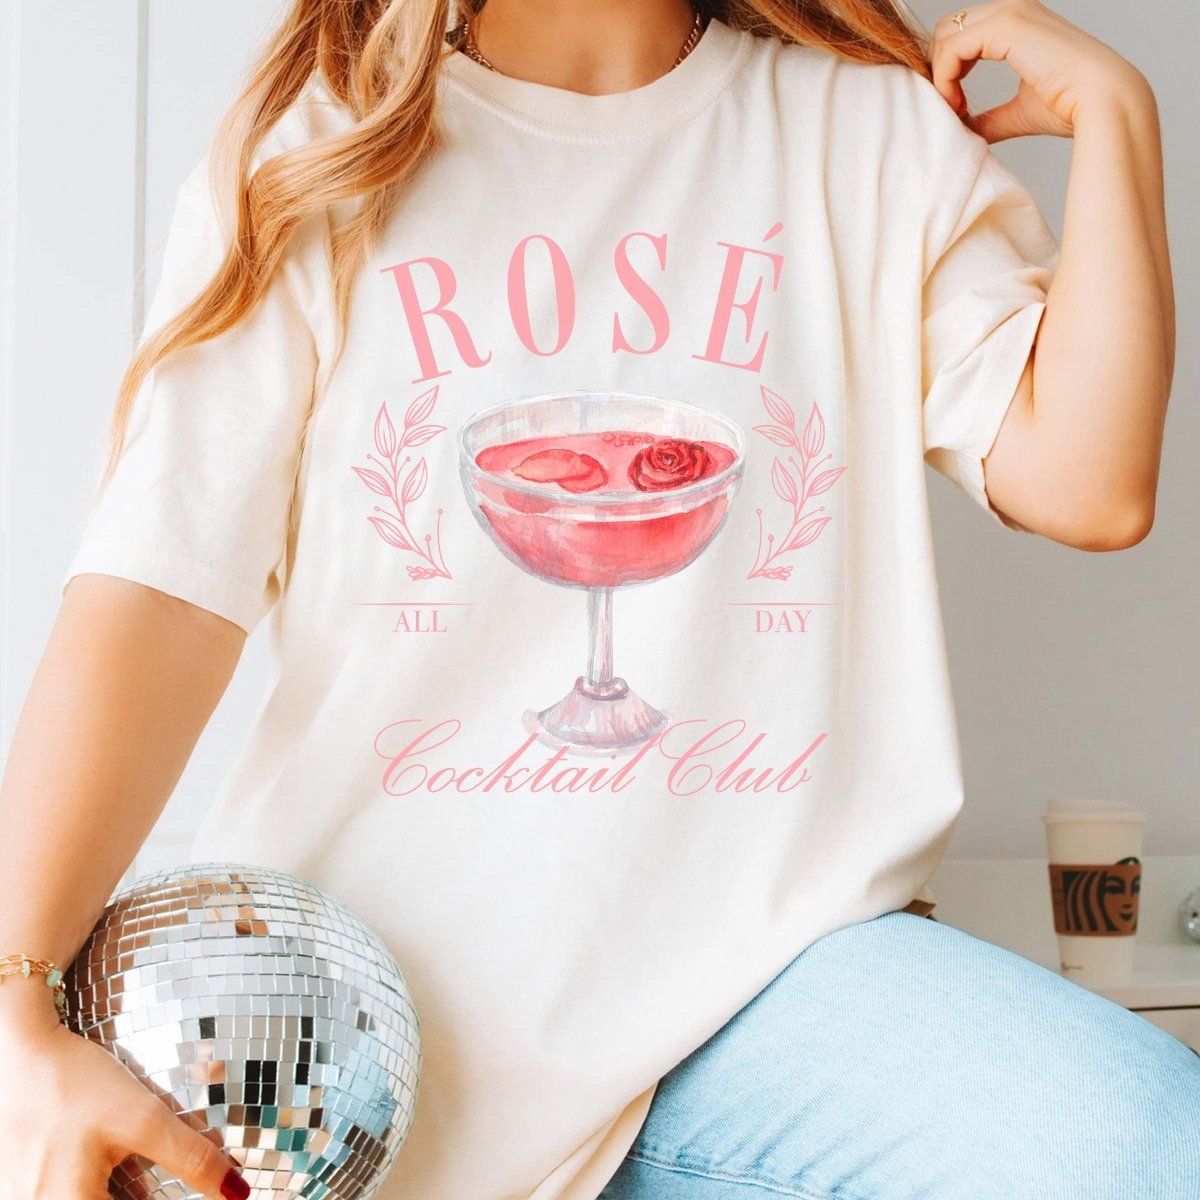 Rose&#39; All Day Cocktail Club Wholesale Tee - Limeberry Designs